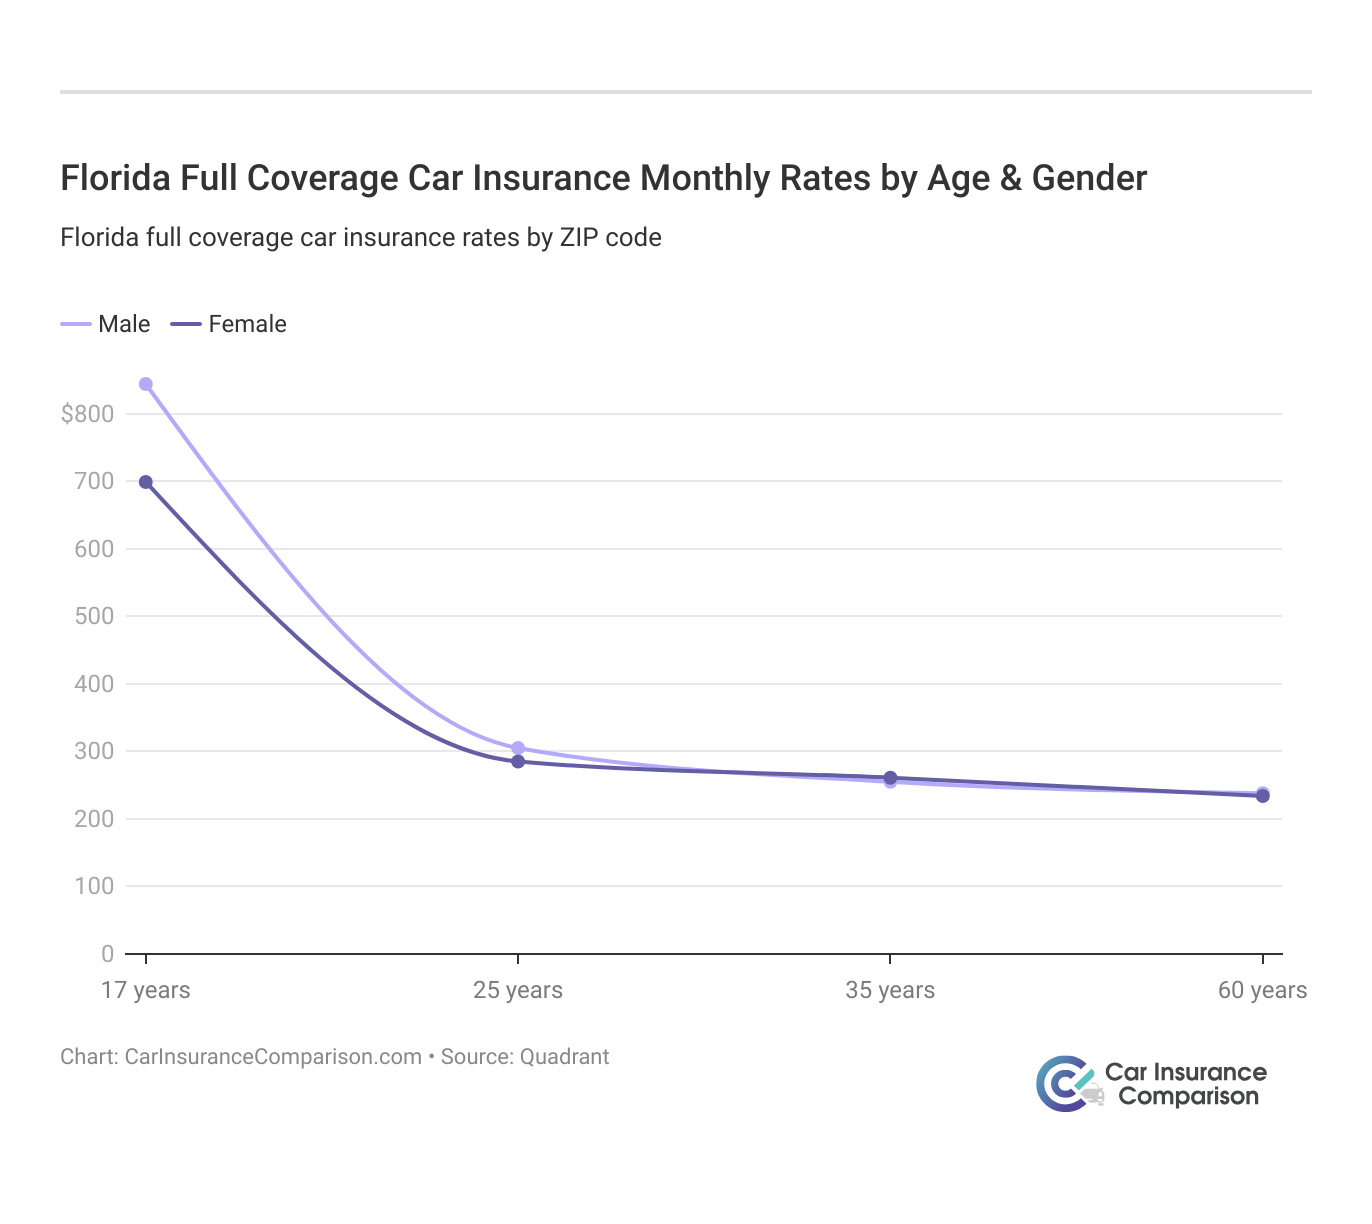 <h3>Florida Full Coverage Car Insurance Monthly Rates by Age & Gender</h3>